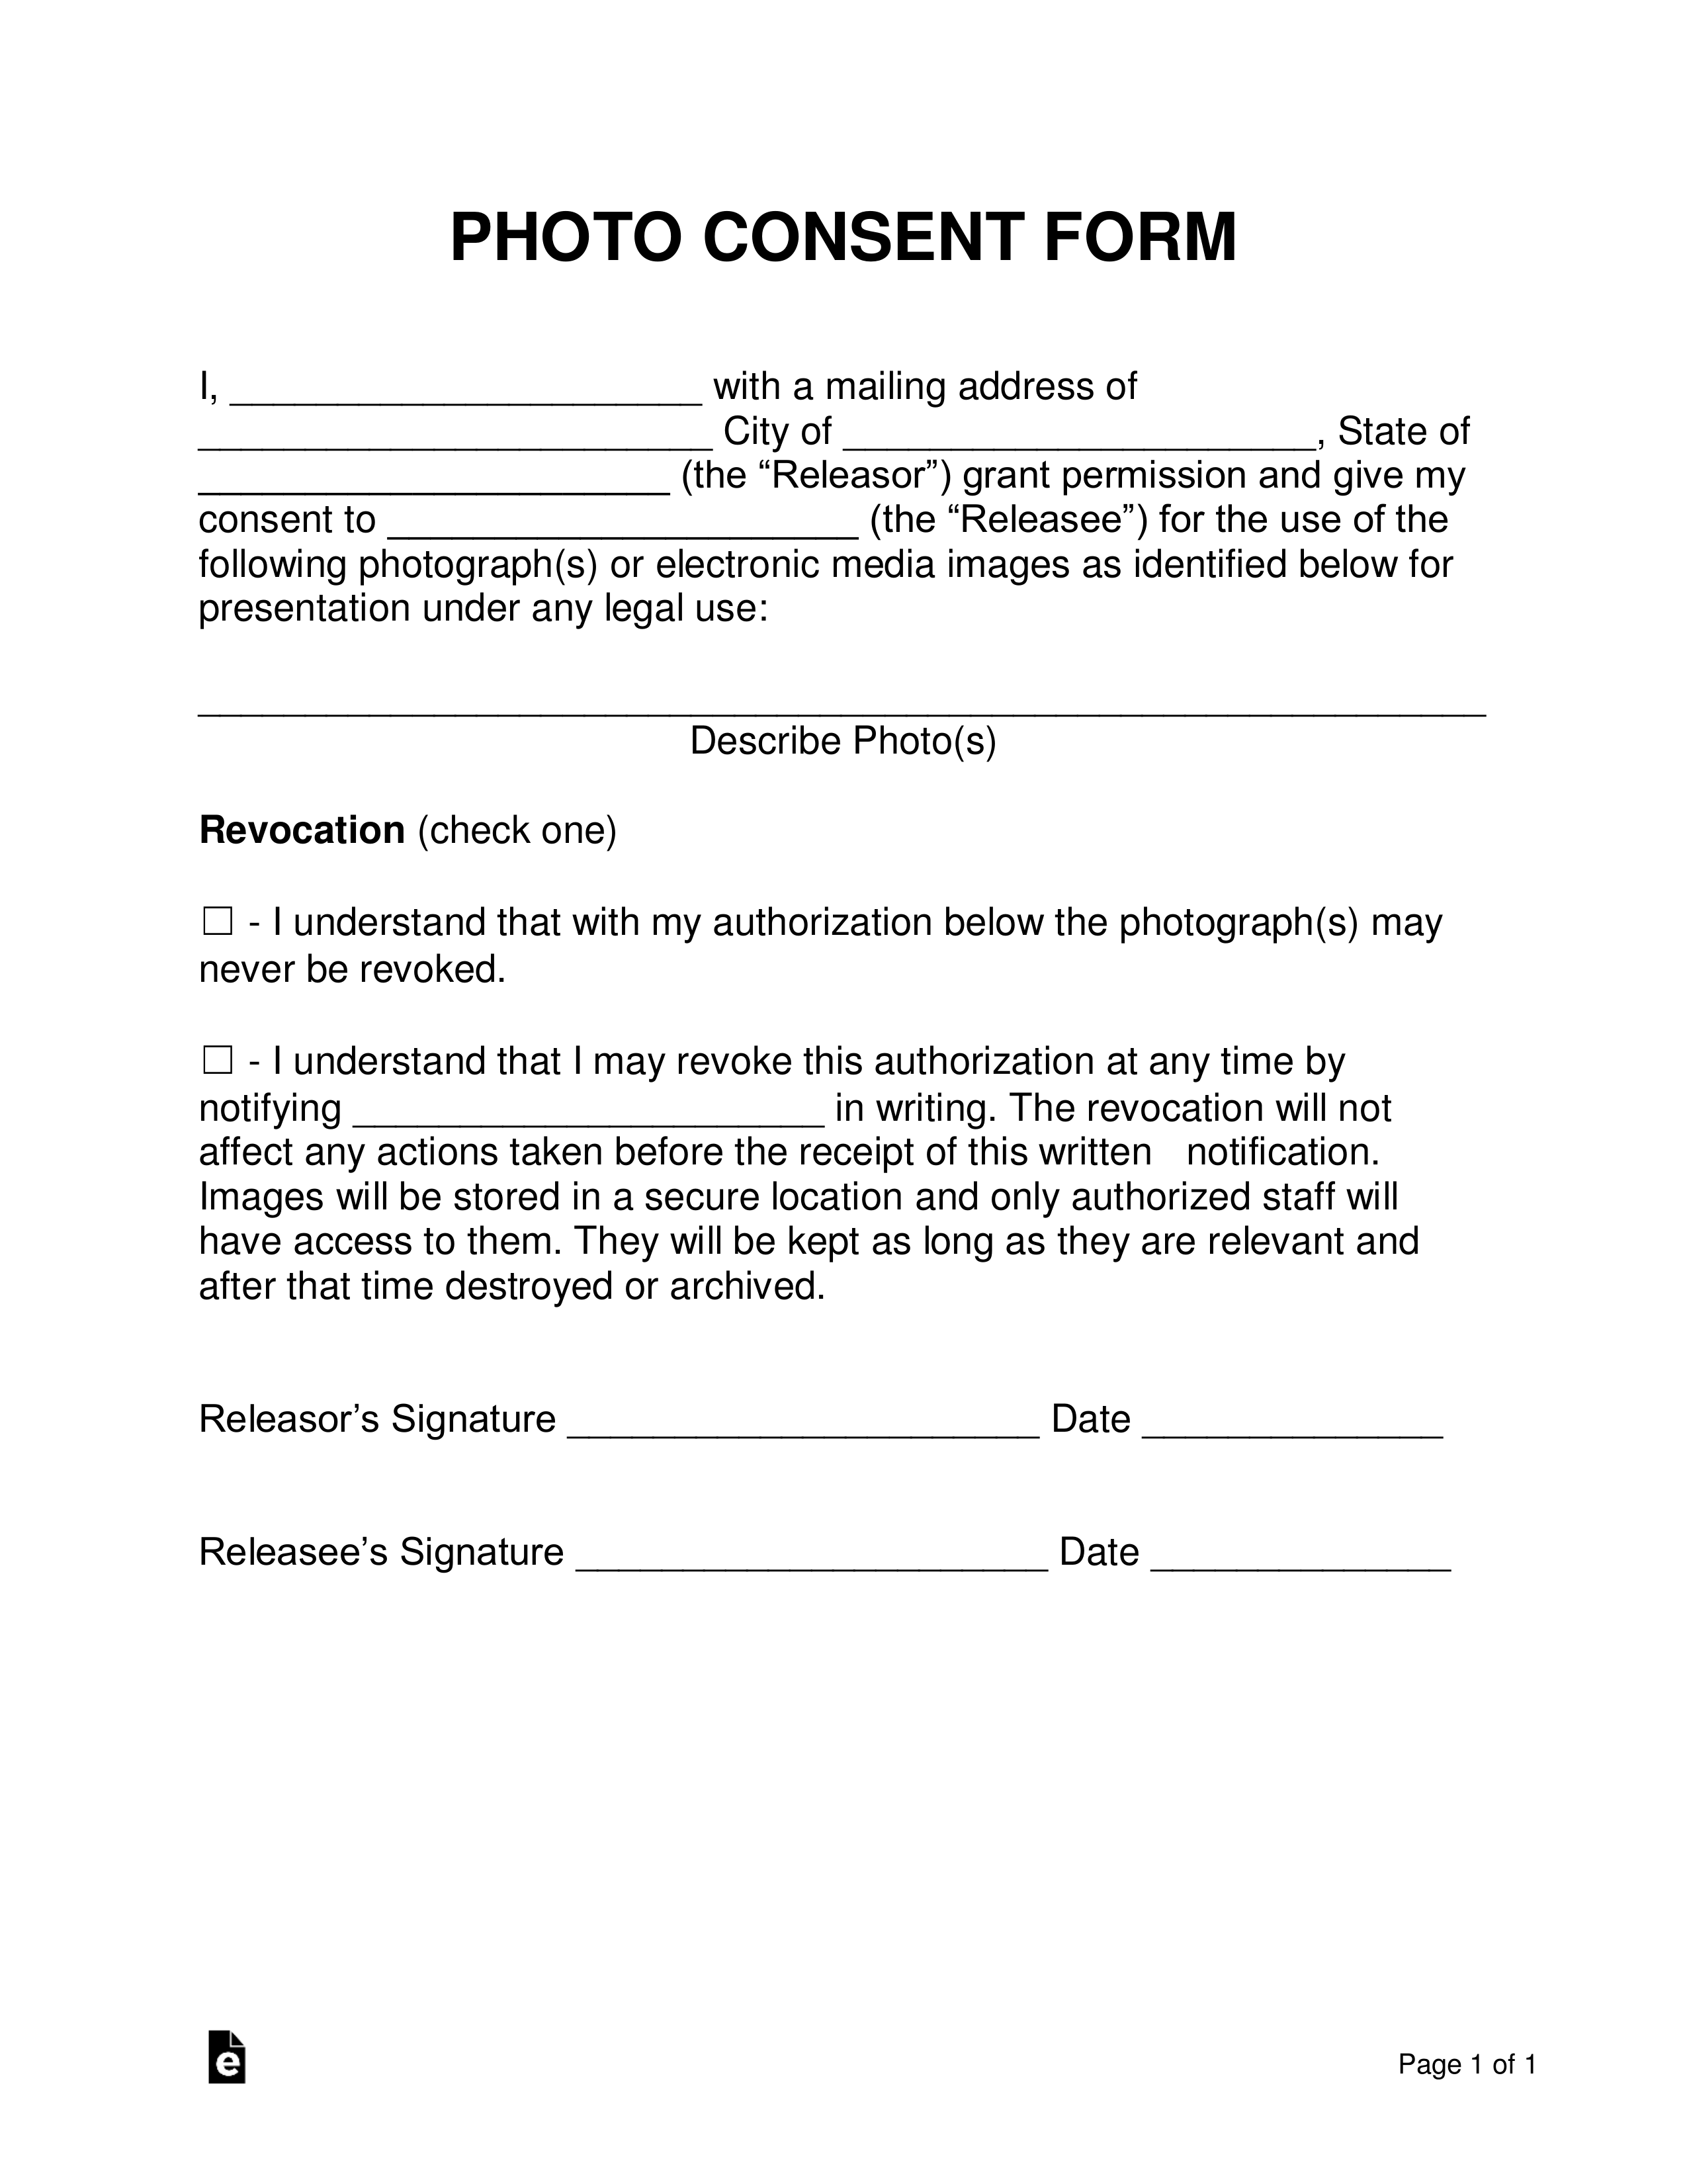 Free Photo Consent Form Word PDF EForms